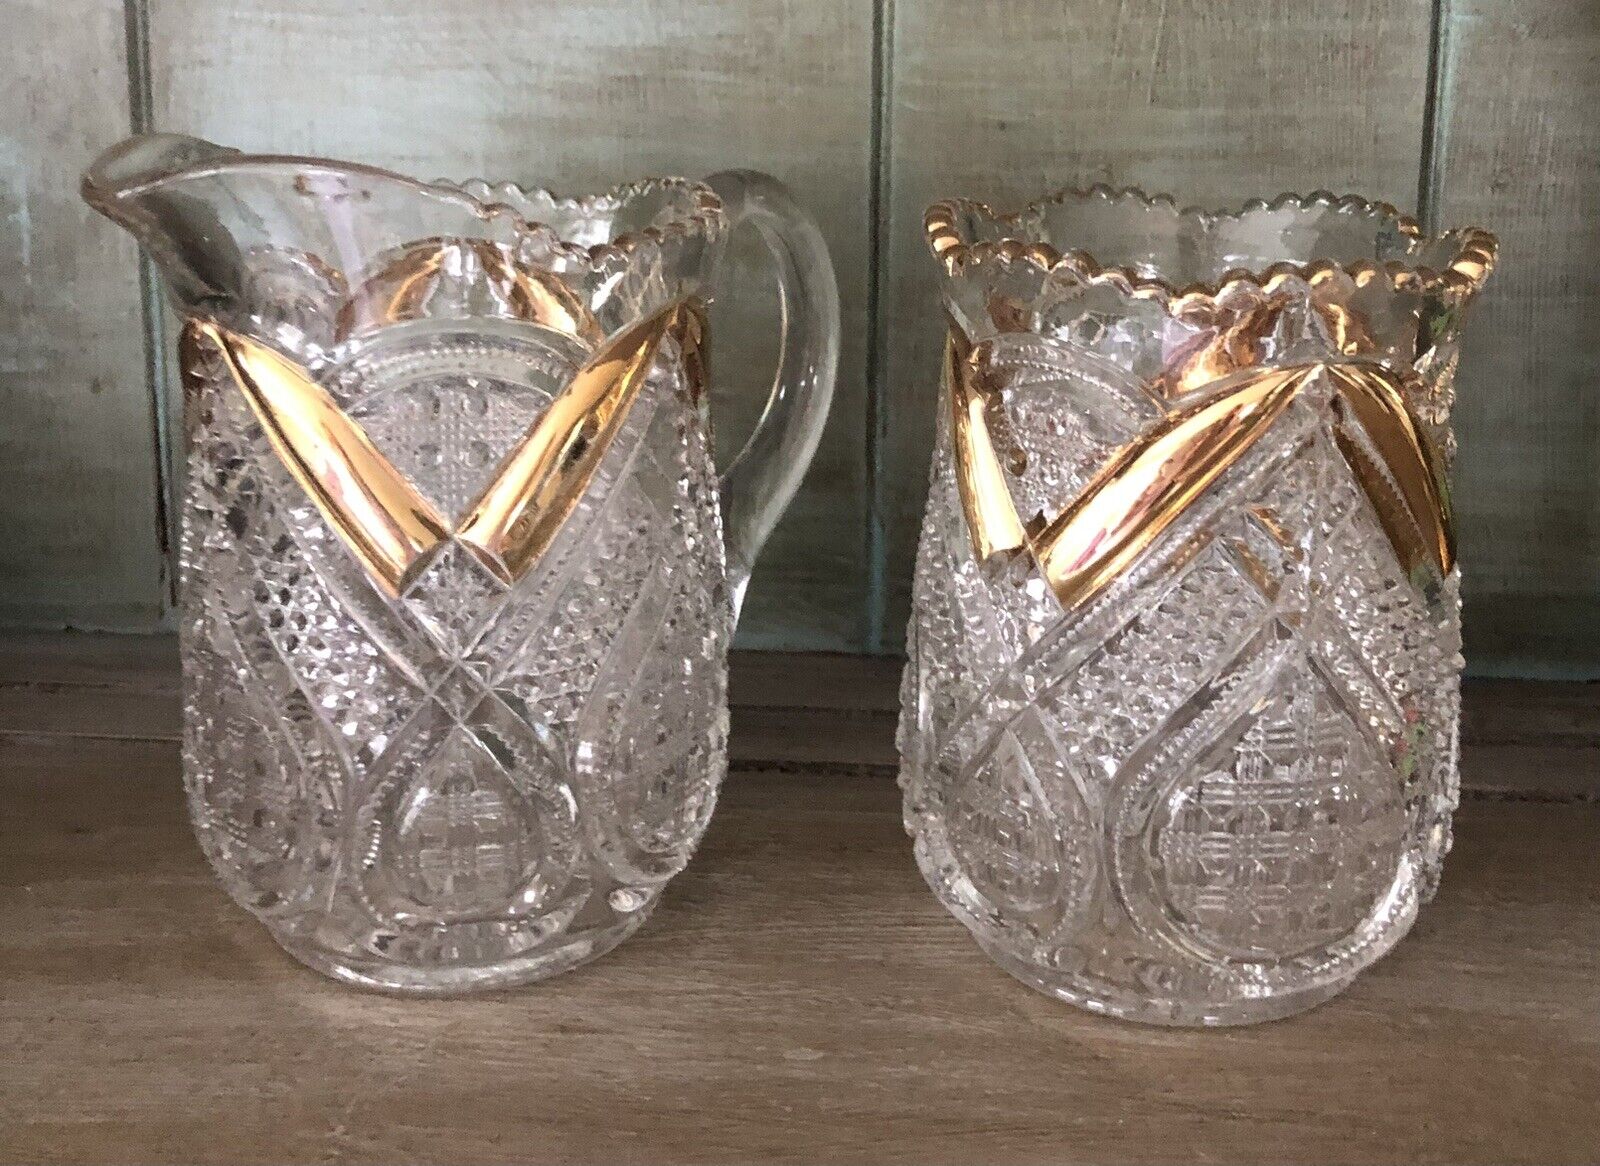 Vintage Early American Pressed Glass Sugar/Spooner & Creamer With Gold Trim 